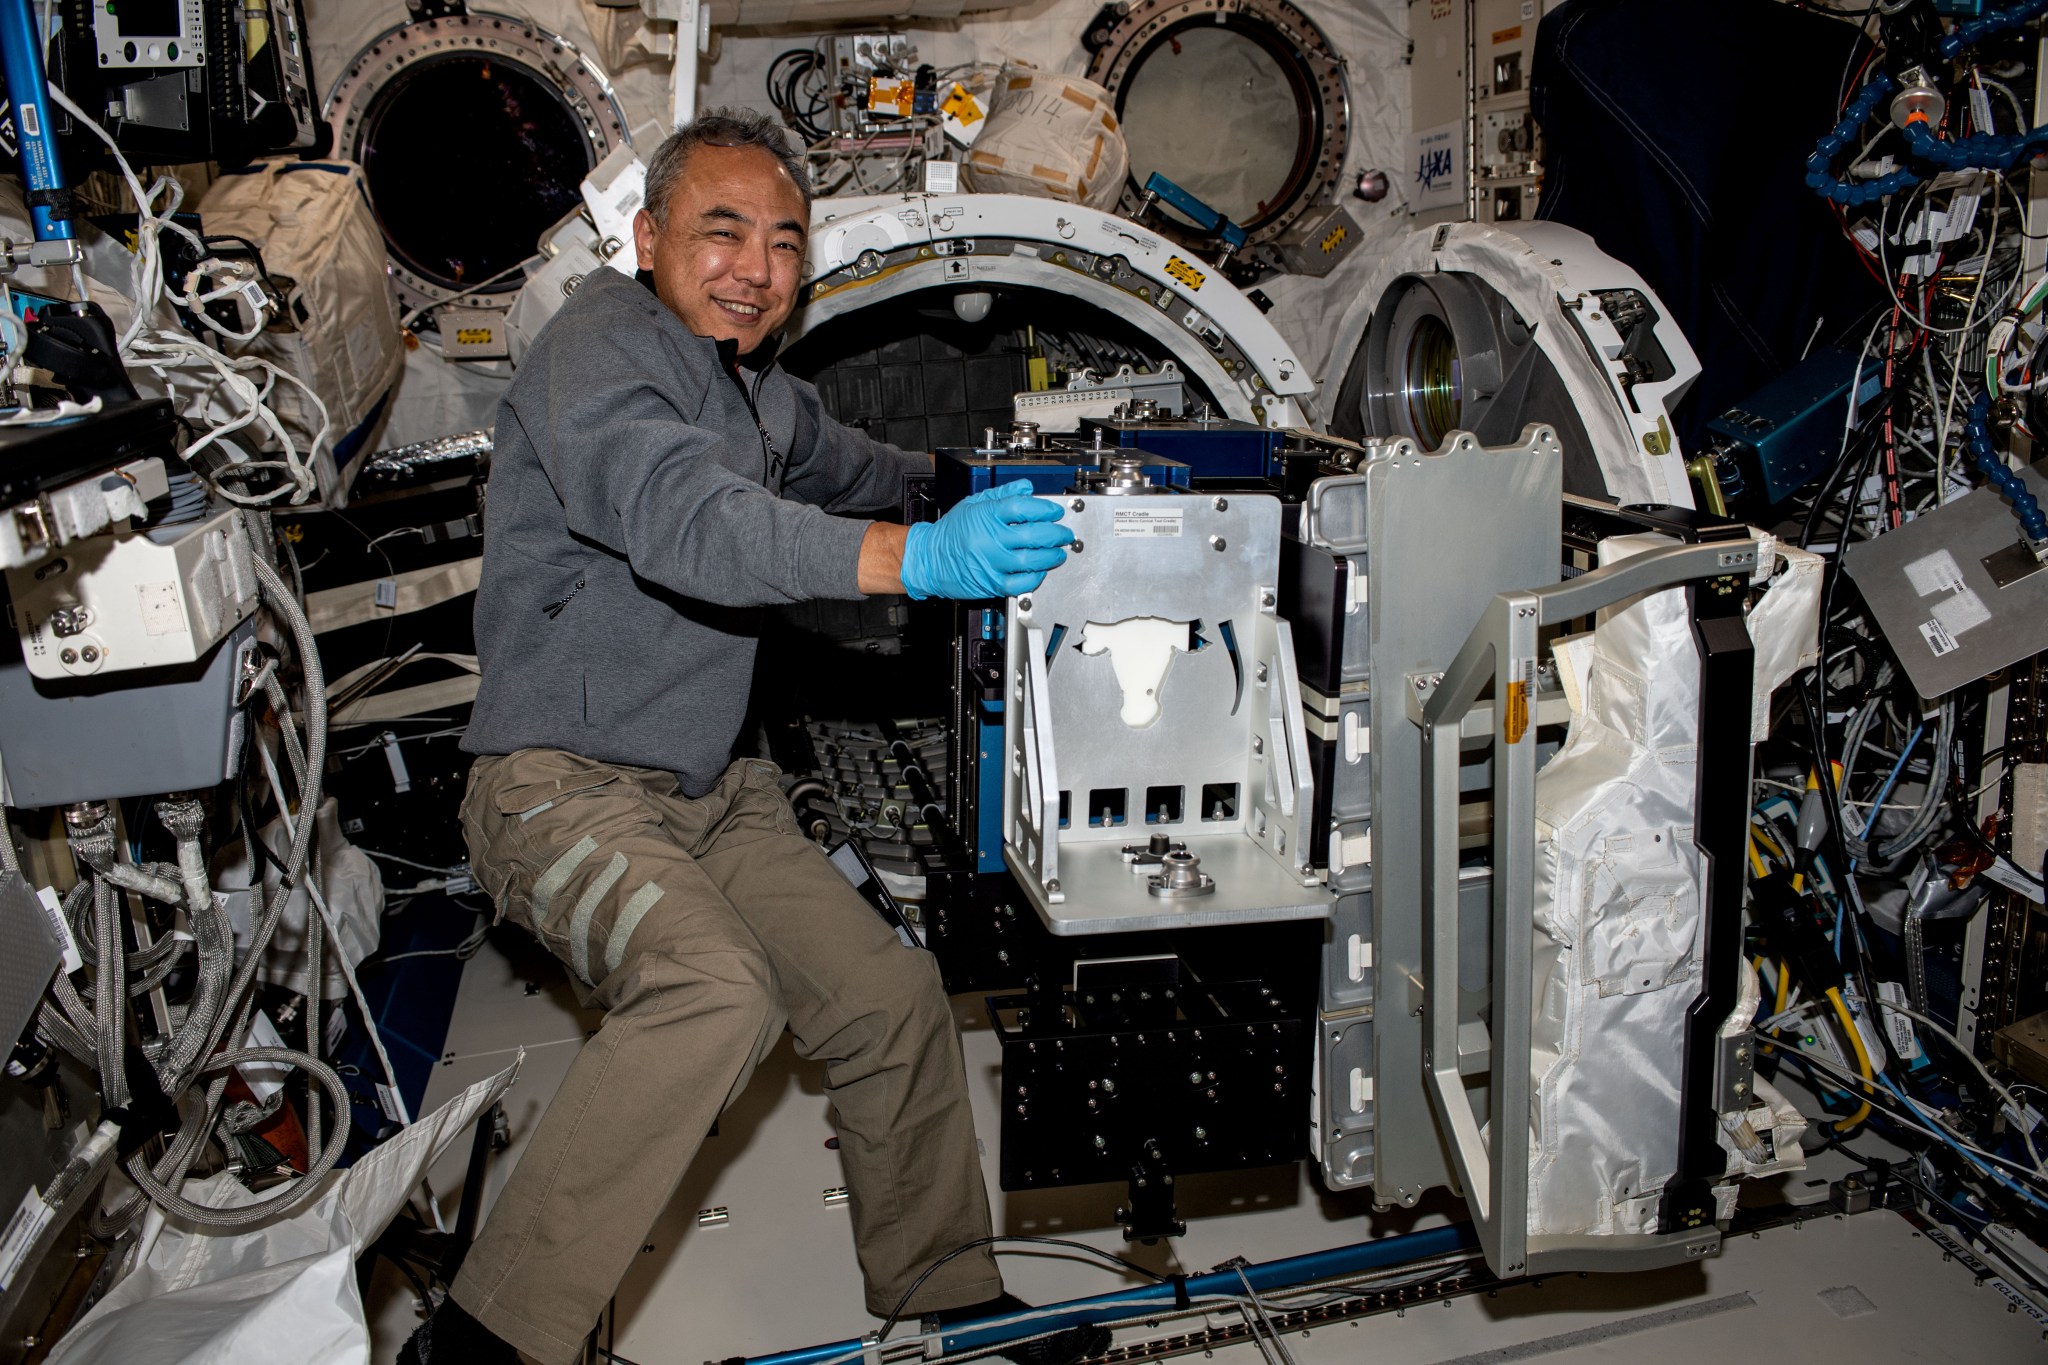 Furukawa, wearing a gray shirt and khaki pants, smiles at the camera as he pulls hardware through the open cylindrical door of an airlock. The suitcase-sized hardware has a silver front, with blue boxes behind it.